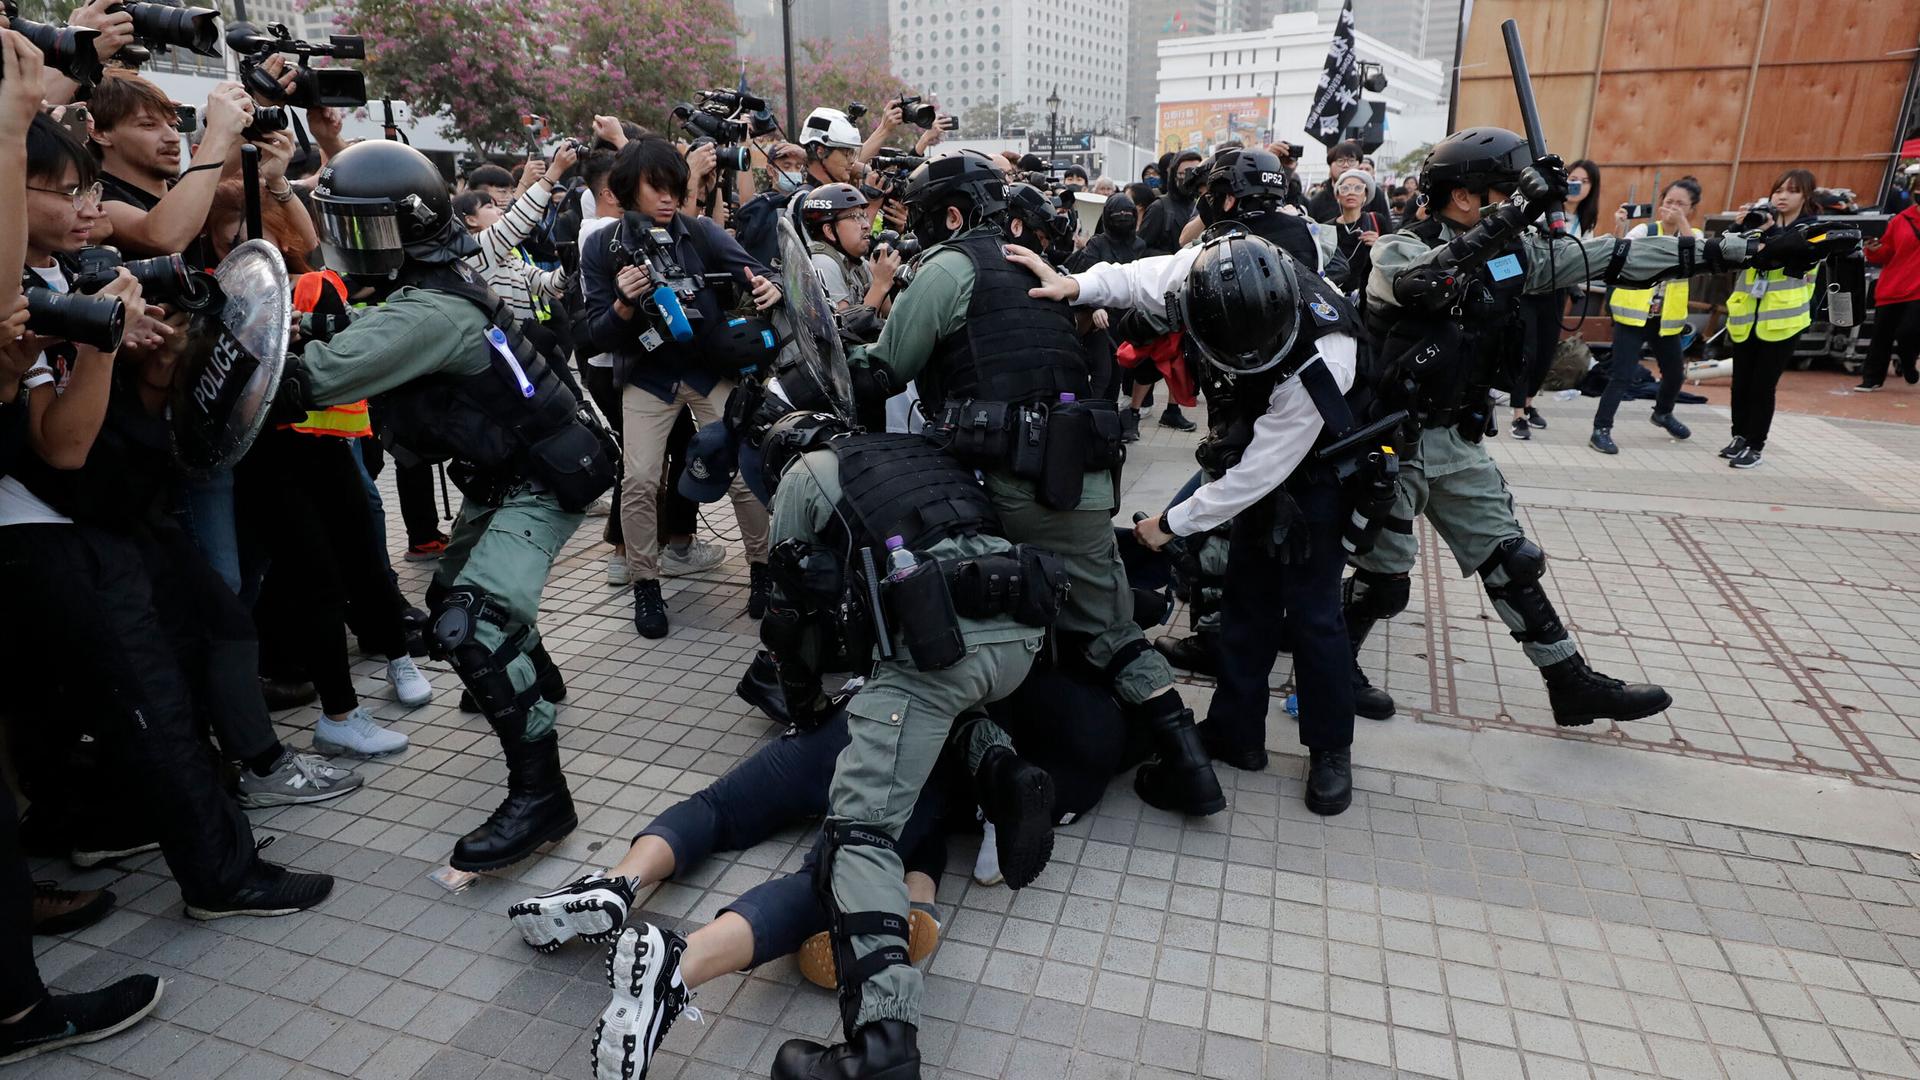 Riot police arrest protesters during a rally to show support for Uighurs and their fight for human rights. Thousands of demonstrators attended a rally to protest against China's policy on the Uighur minority, Hong Kong, Dec. 2019.